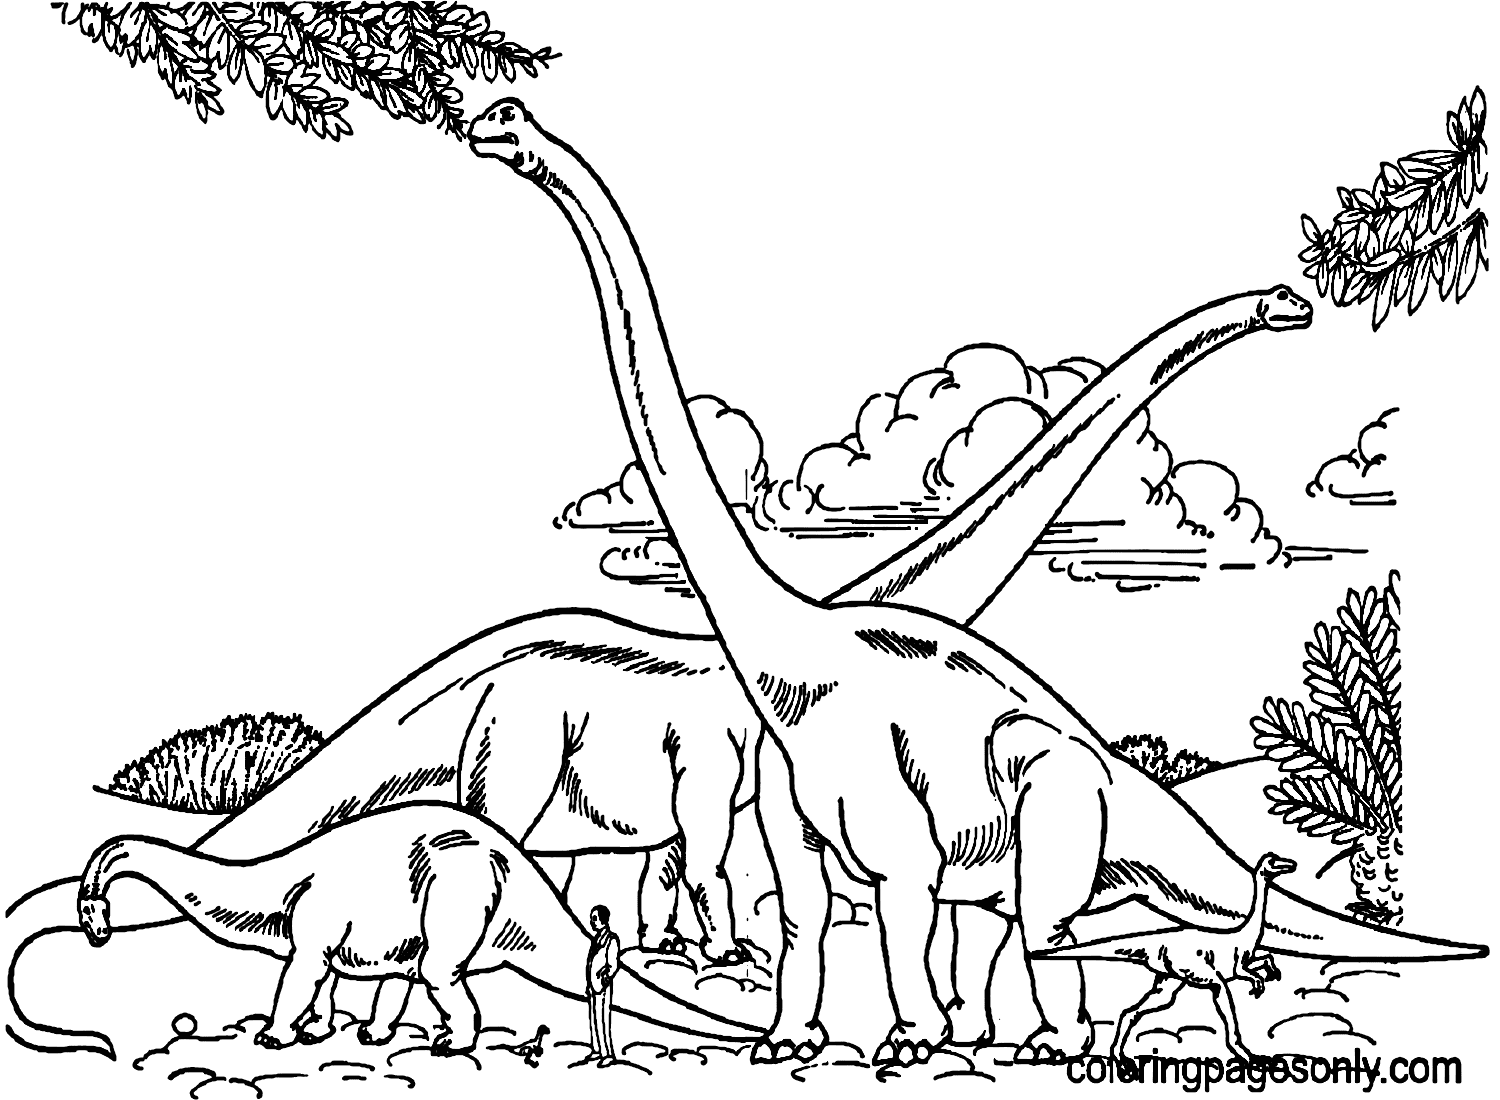 Barosaurus Hypselosaurus and Gallimimus Comparison With Human Coloring Pages